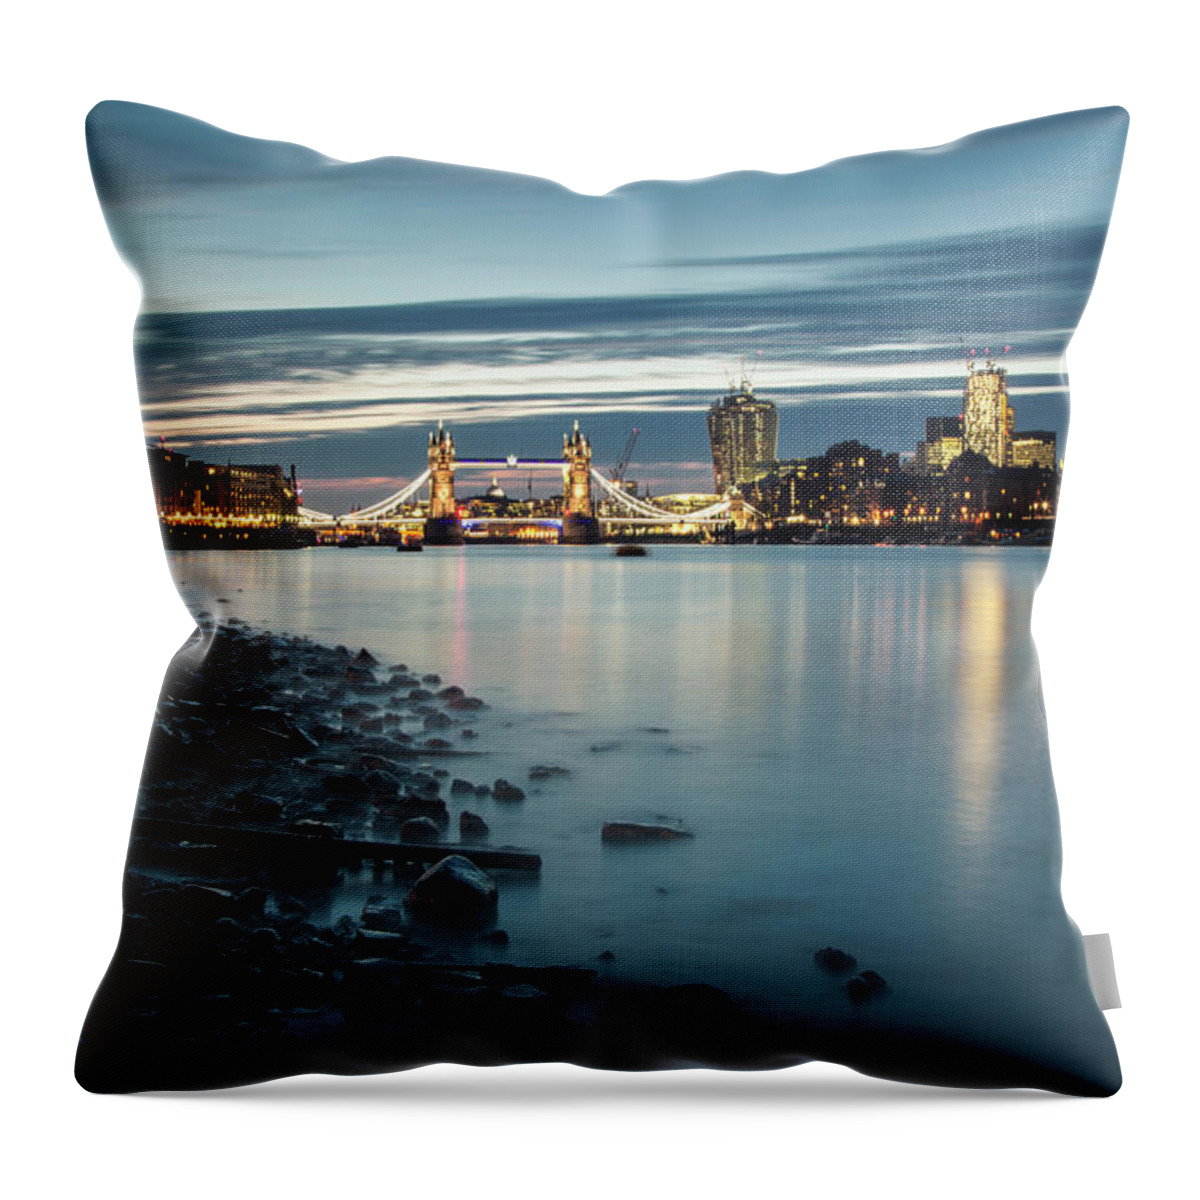 Tranquility Throw Pillow featuring the photograph London Skyline At Night by Ray Wise